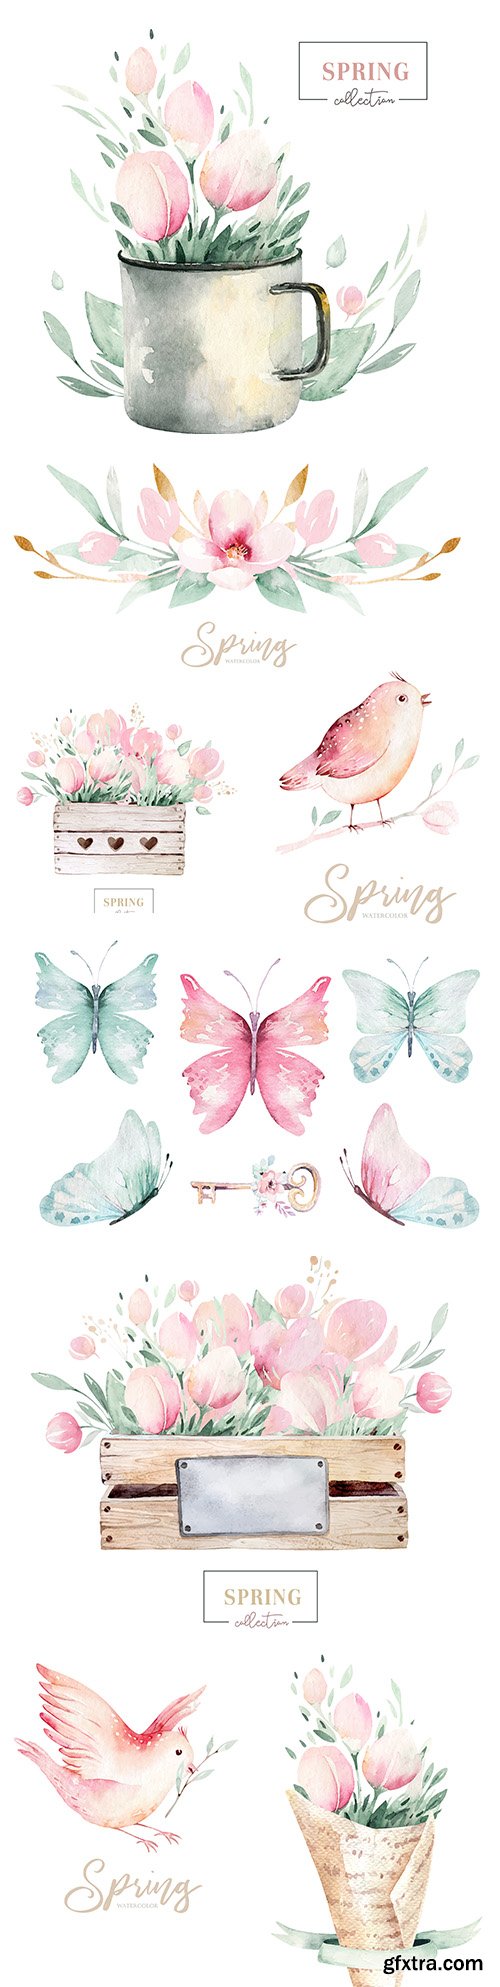 Spring bouquet flowers and birds watercolor design
